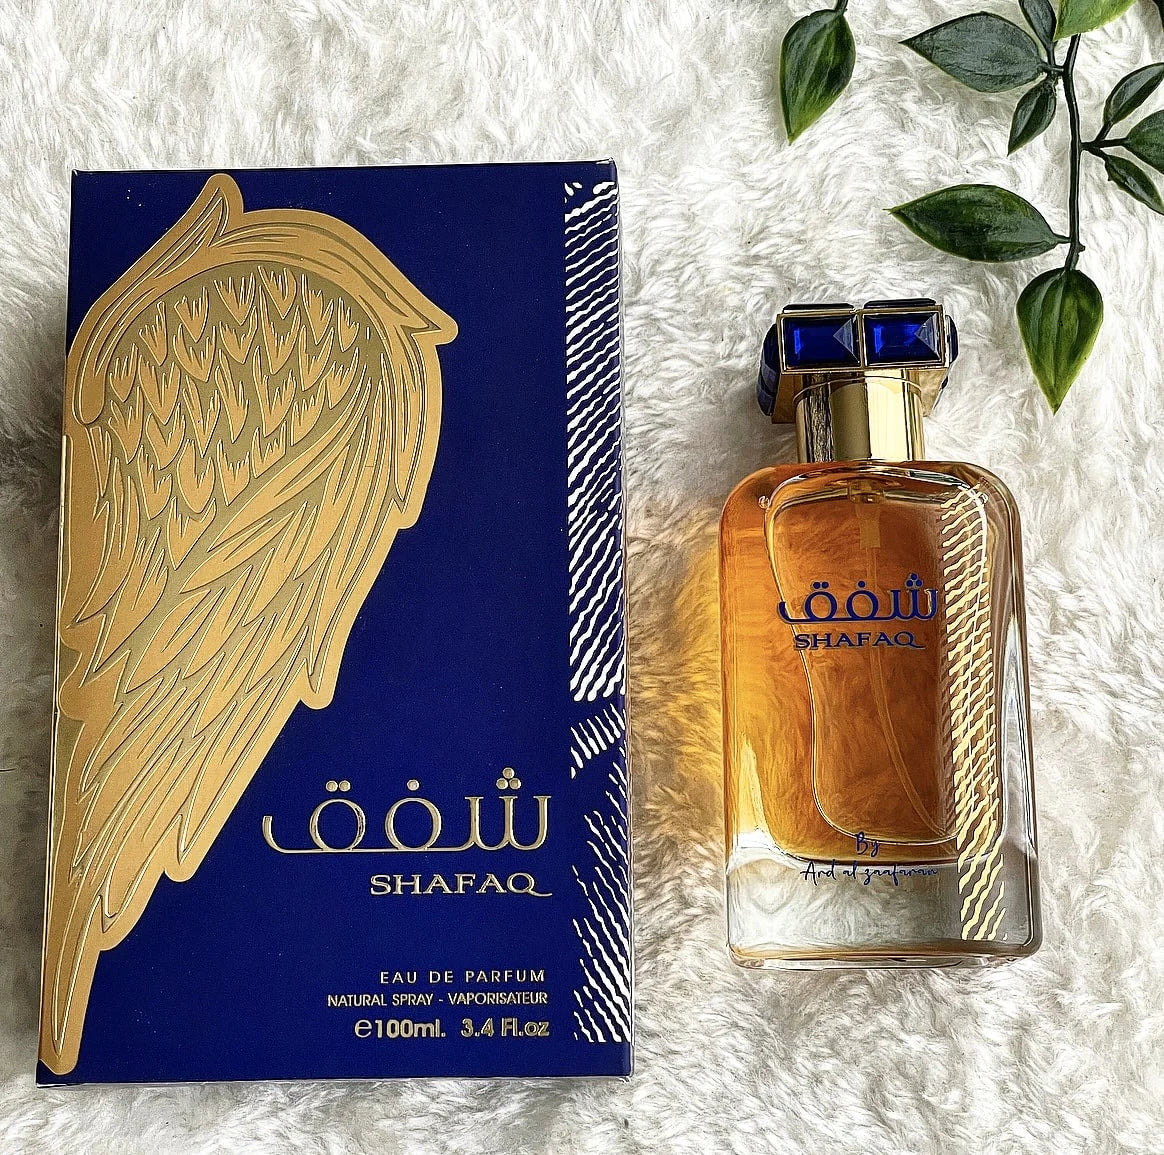 A square glass perfume bottle with a golden-yellow liquid is displayed next to its packaging. The bottle has a blue and white checkered cap and features the name "SHAFAQ" in blue letters with Arabic script. Below, in small print, is "By Ard al Zaafaran."  The bottle and box are placed on a fluffy white textile surface, with green leaves peeking into the frame from the top right corner.